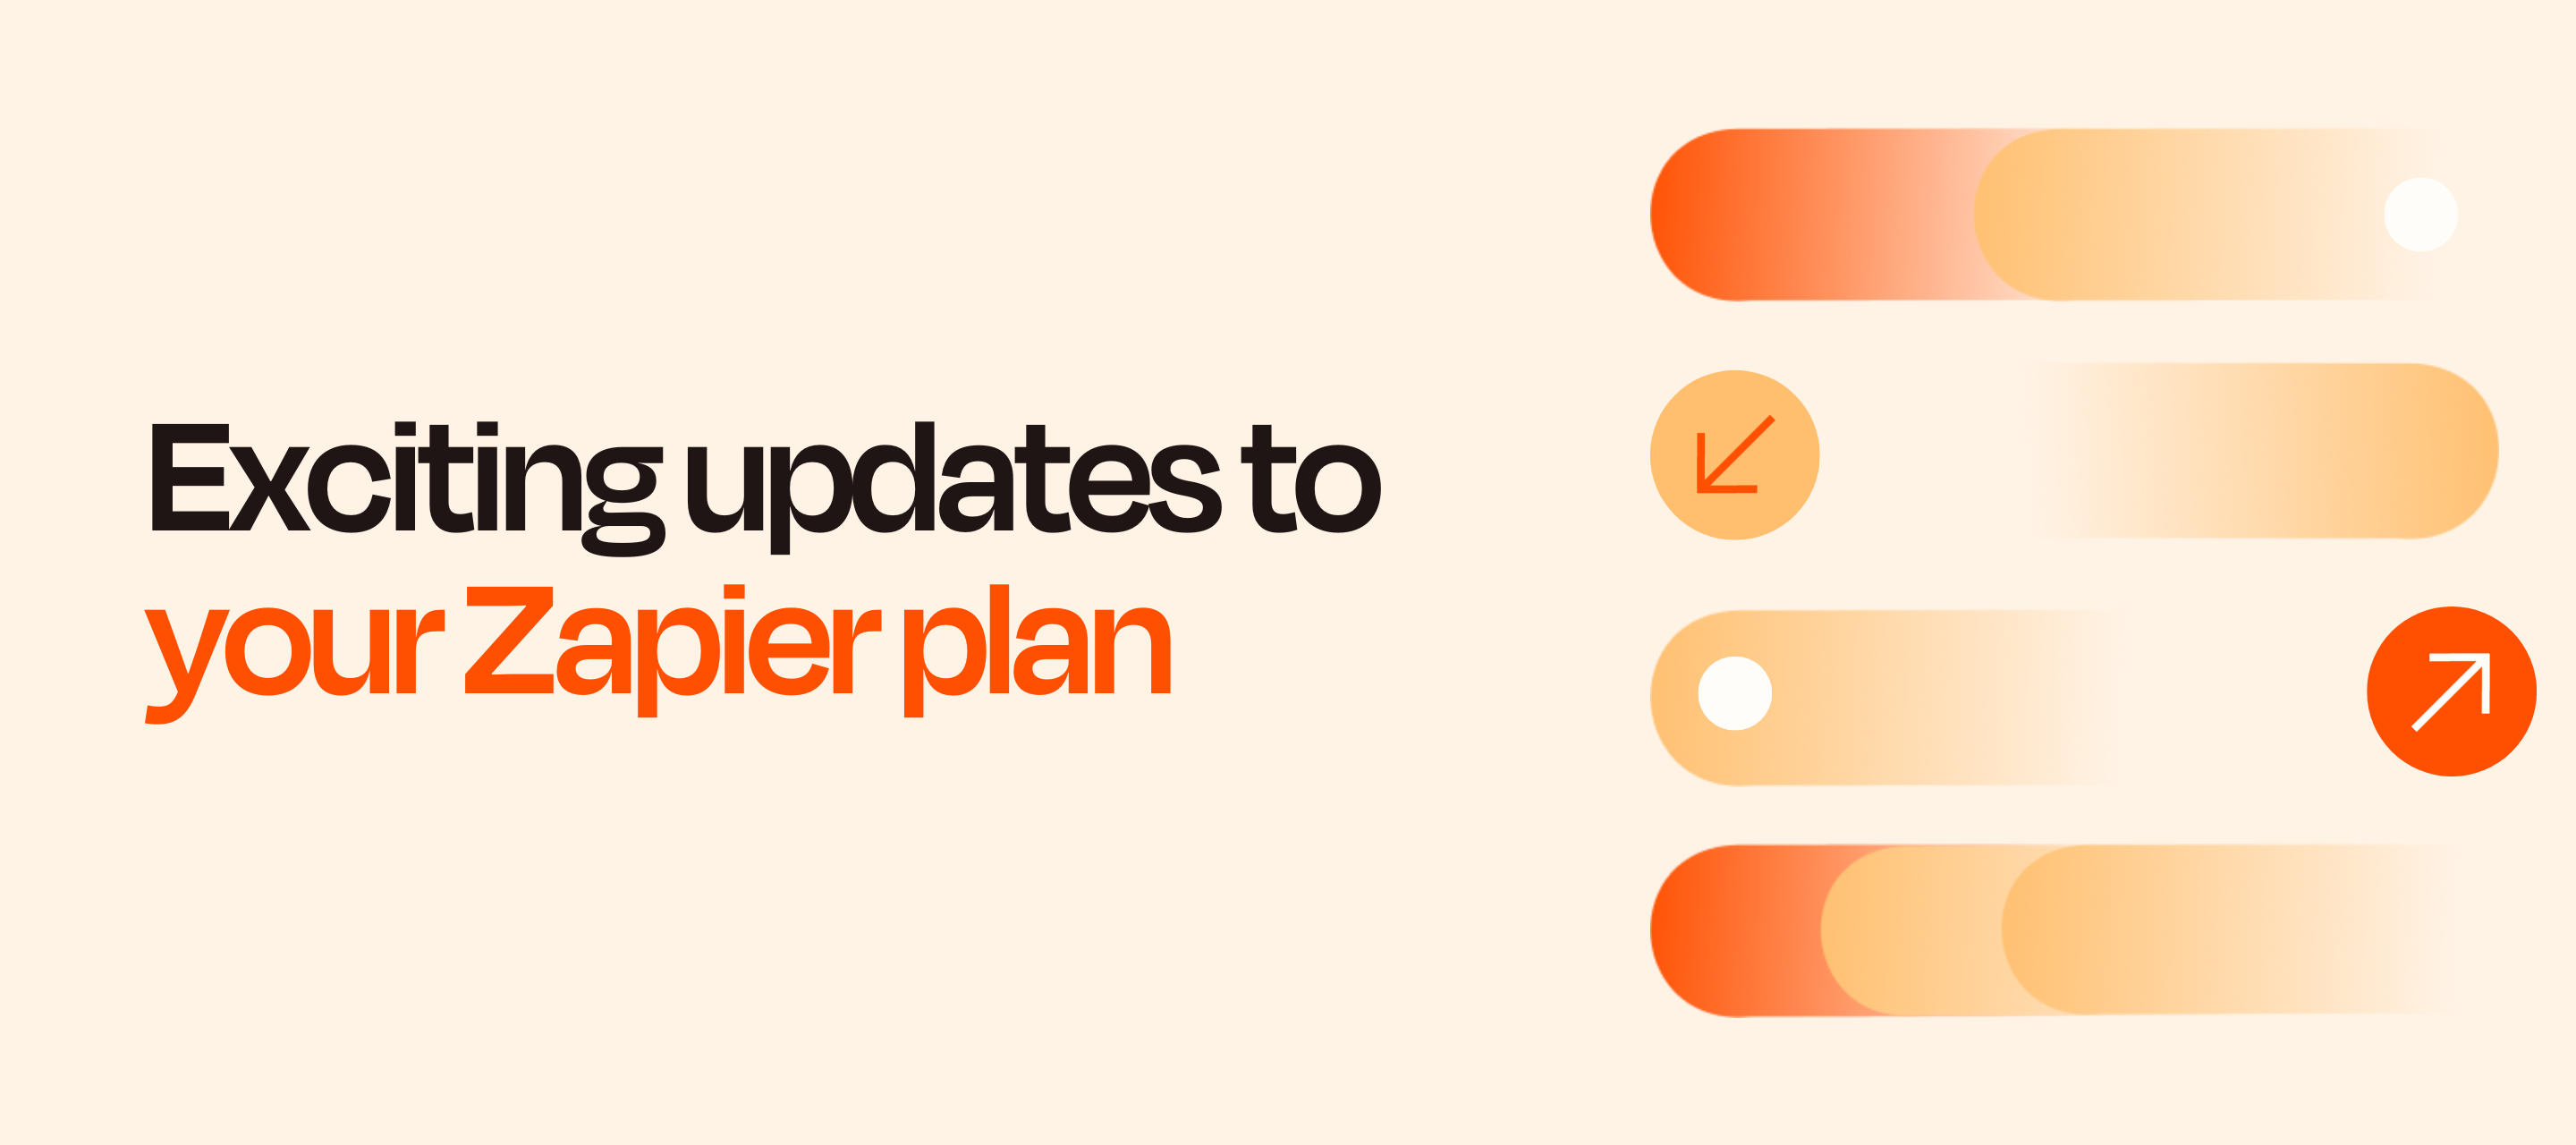 Exciting updates to your Zapier plan!